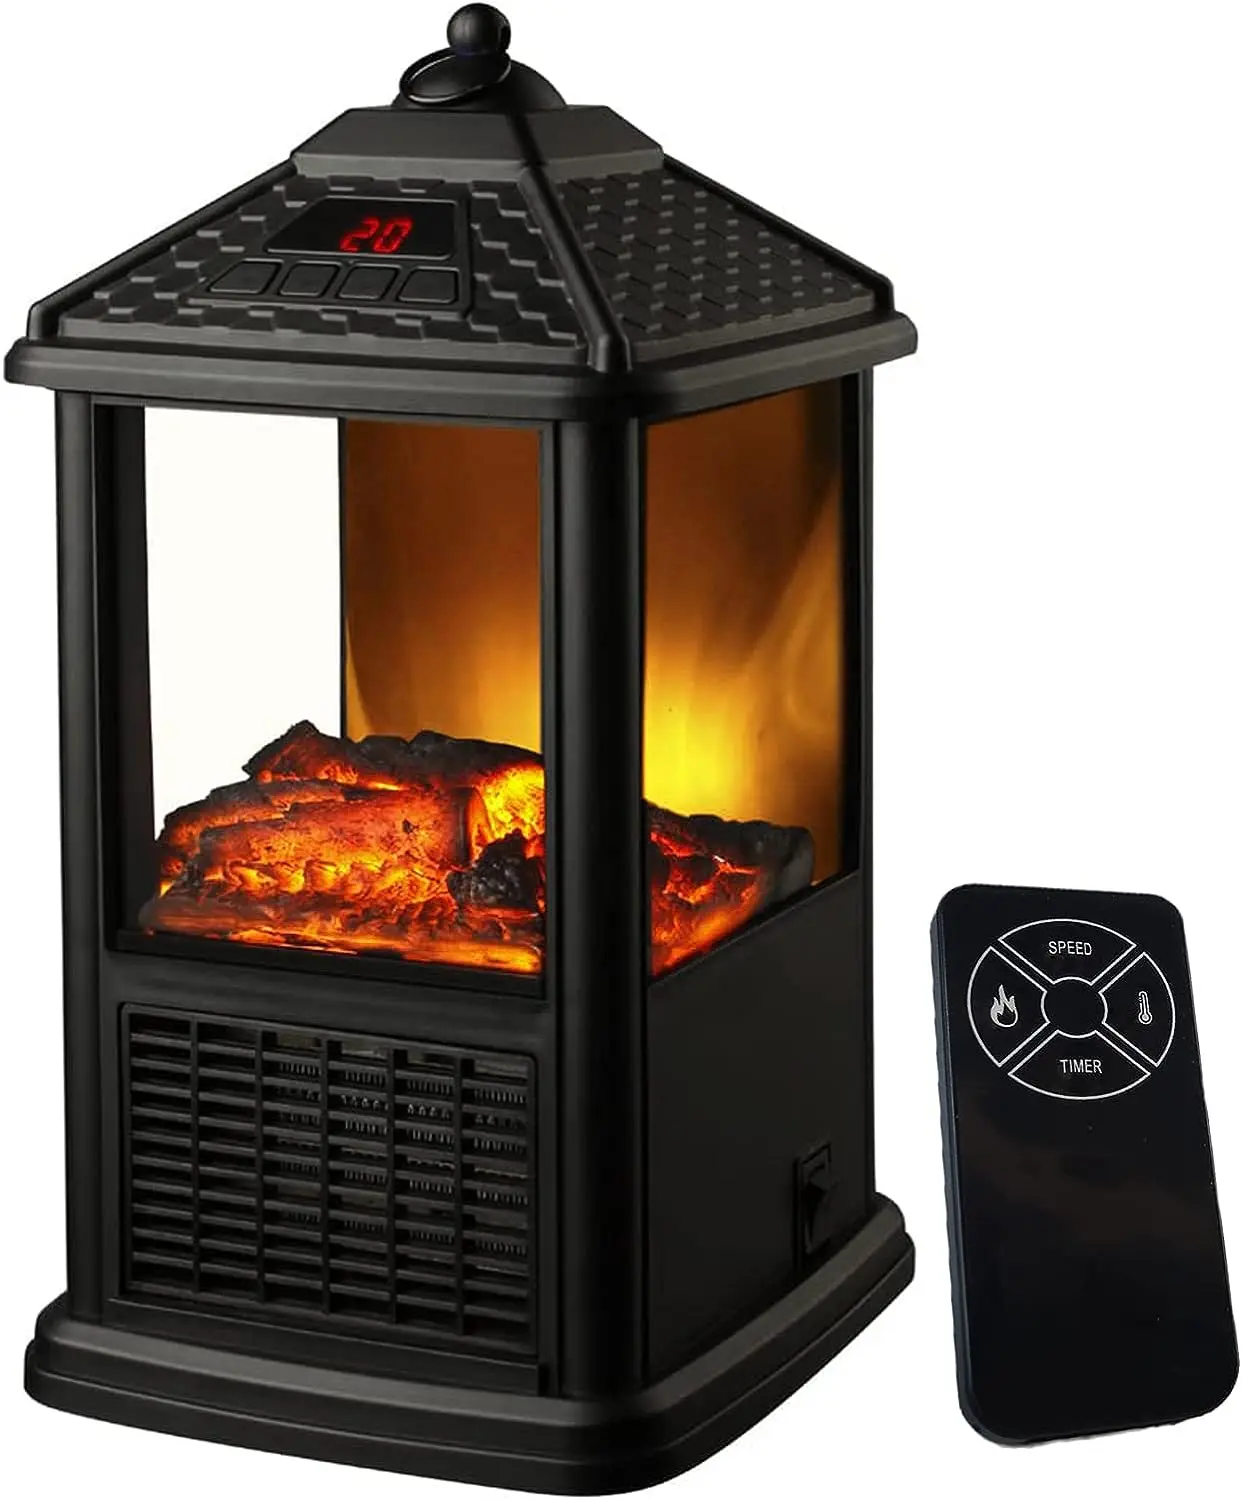 

Little Small Fireplaces Space Heaters for Indoor Use Freestanding Bedroom Mini Space Fireplace Heaters Stove with Flame Thermo